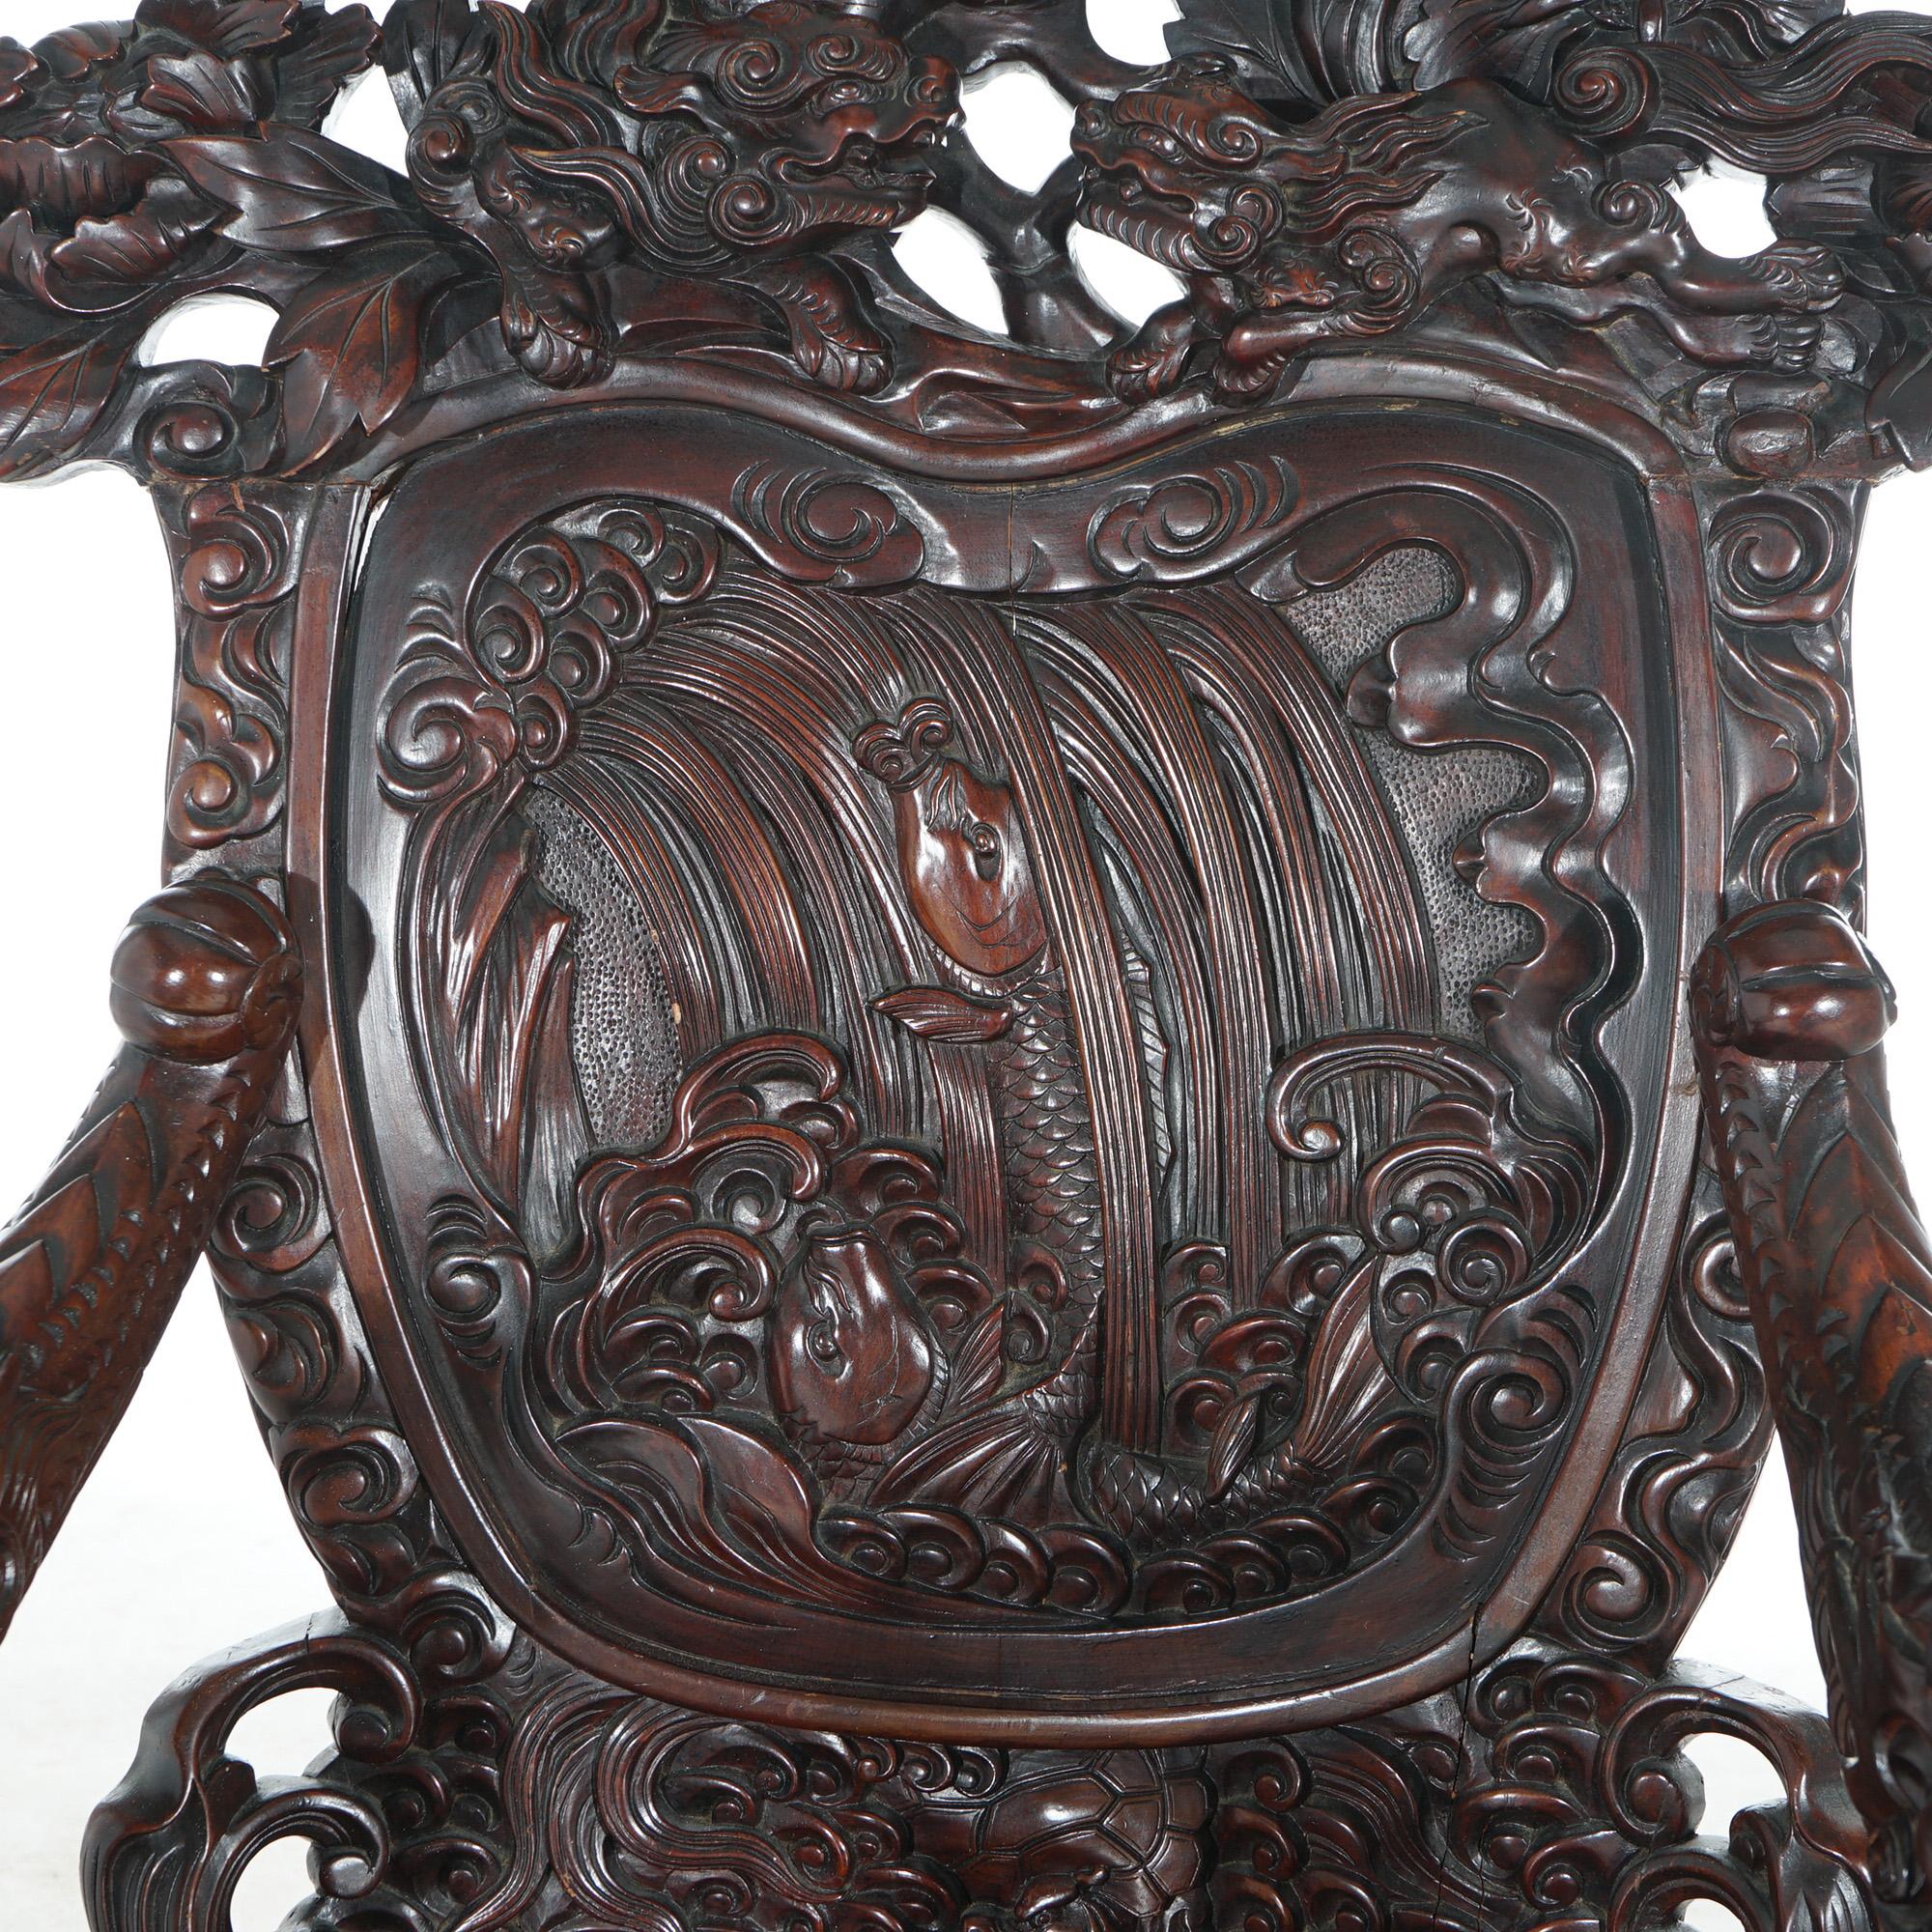 Antique Chinese Deep Carved Rosewood Figural King Throne Chair with Dragons 1920 For Sale 12